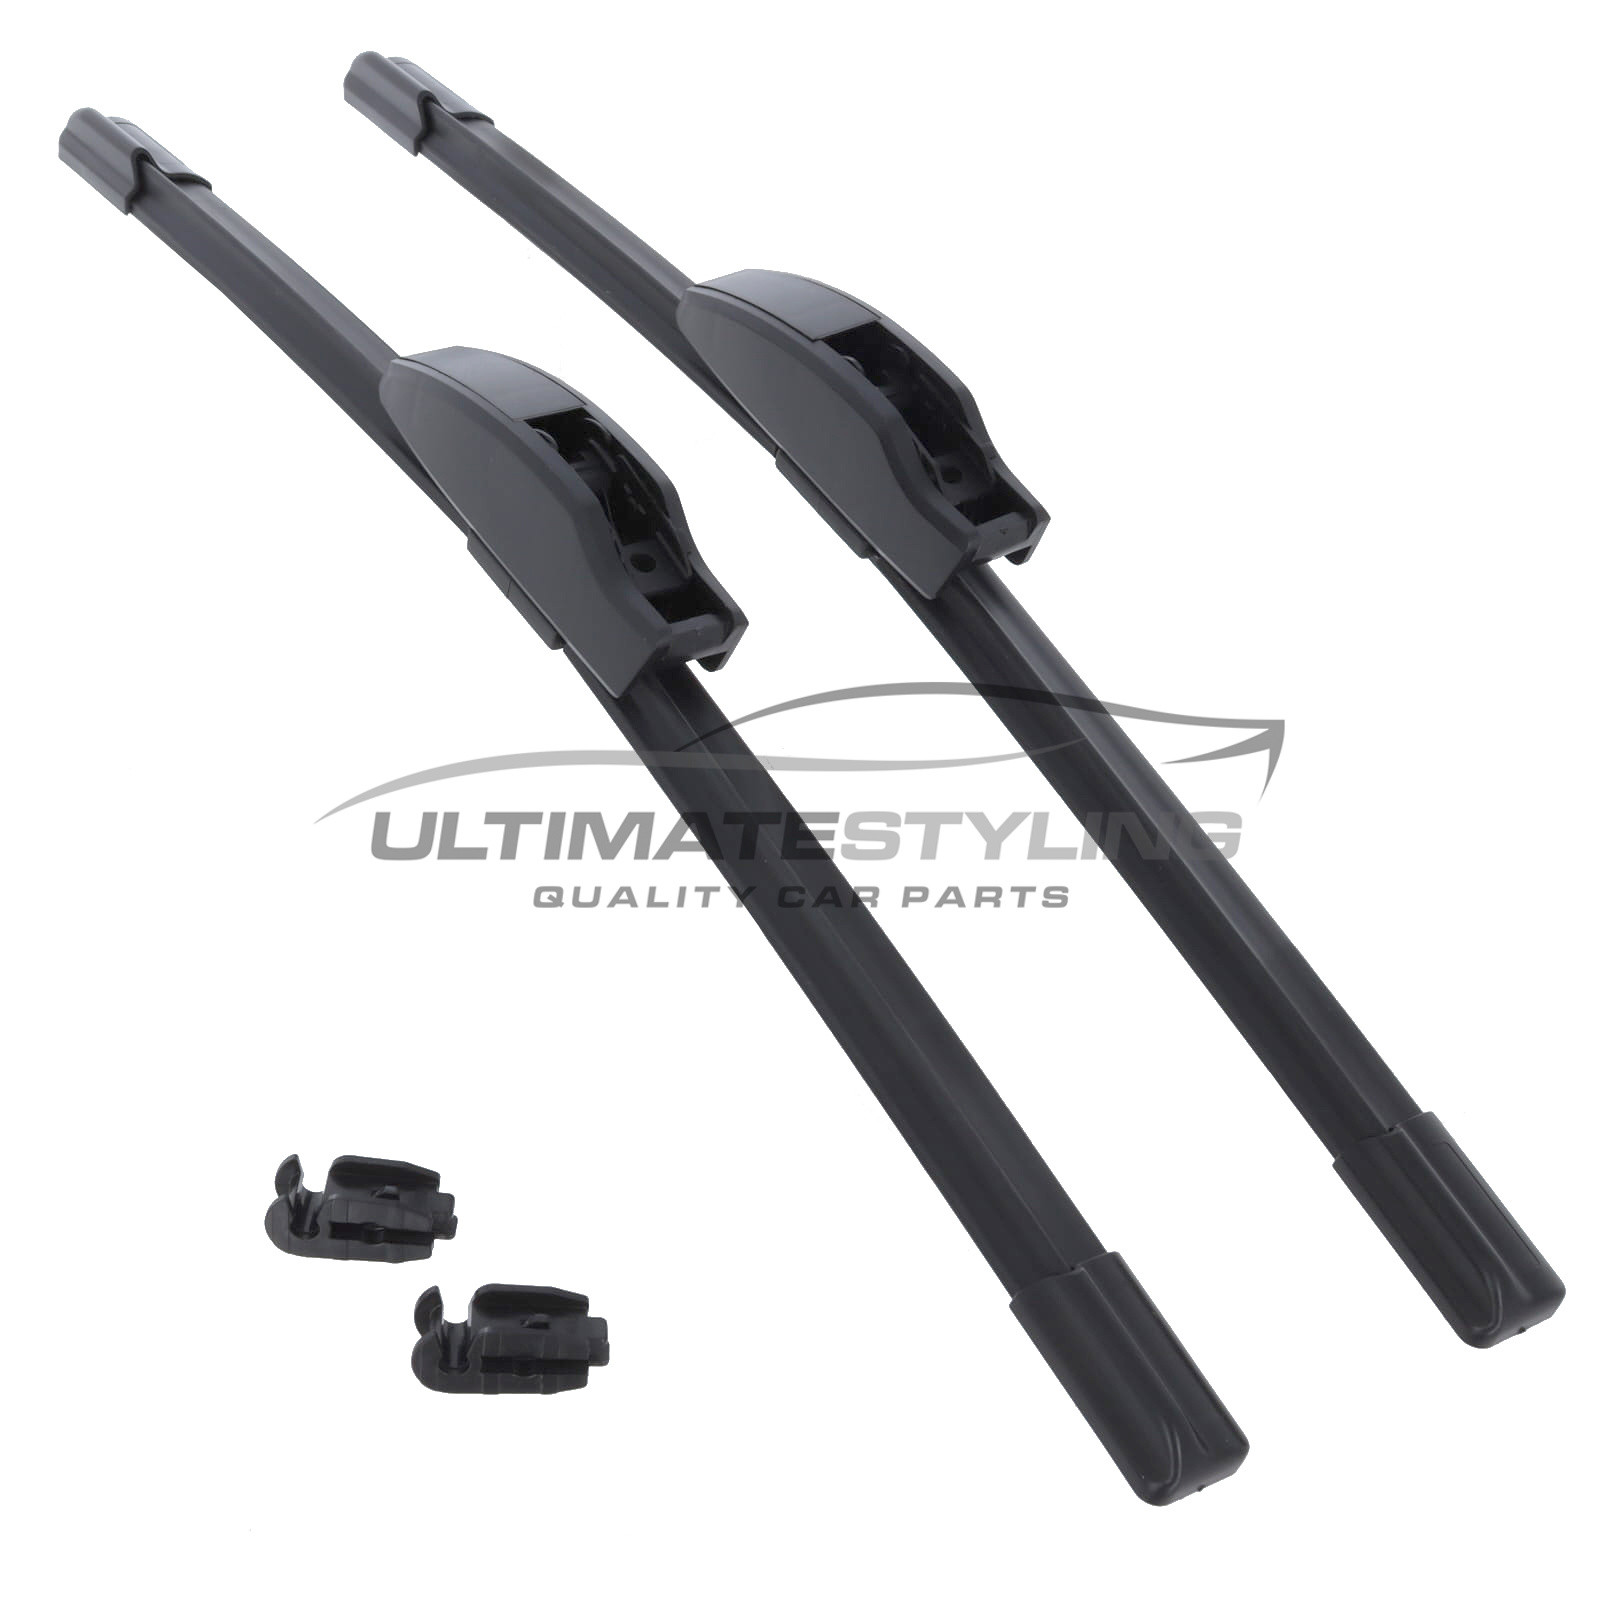 Drivers Side & Passenger Side (Front) Wiper Blades for Reliant Scimitar